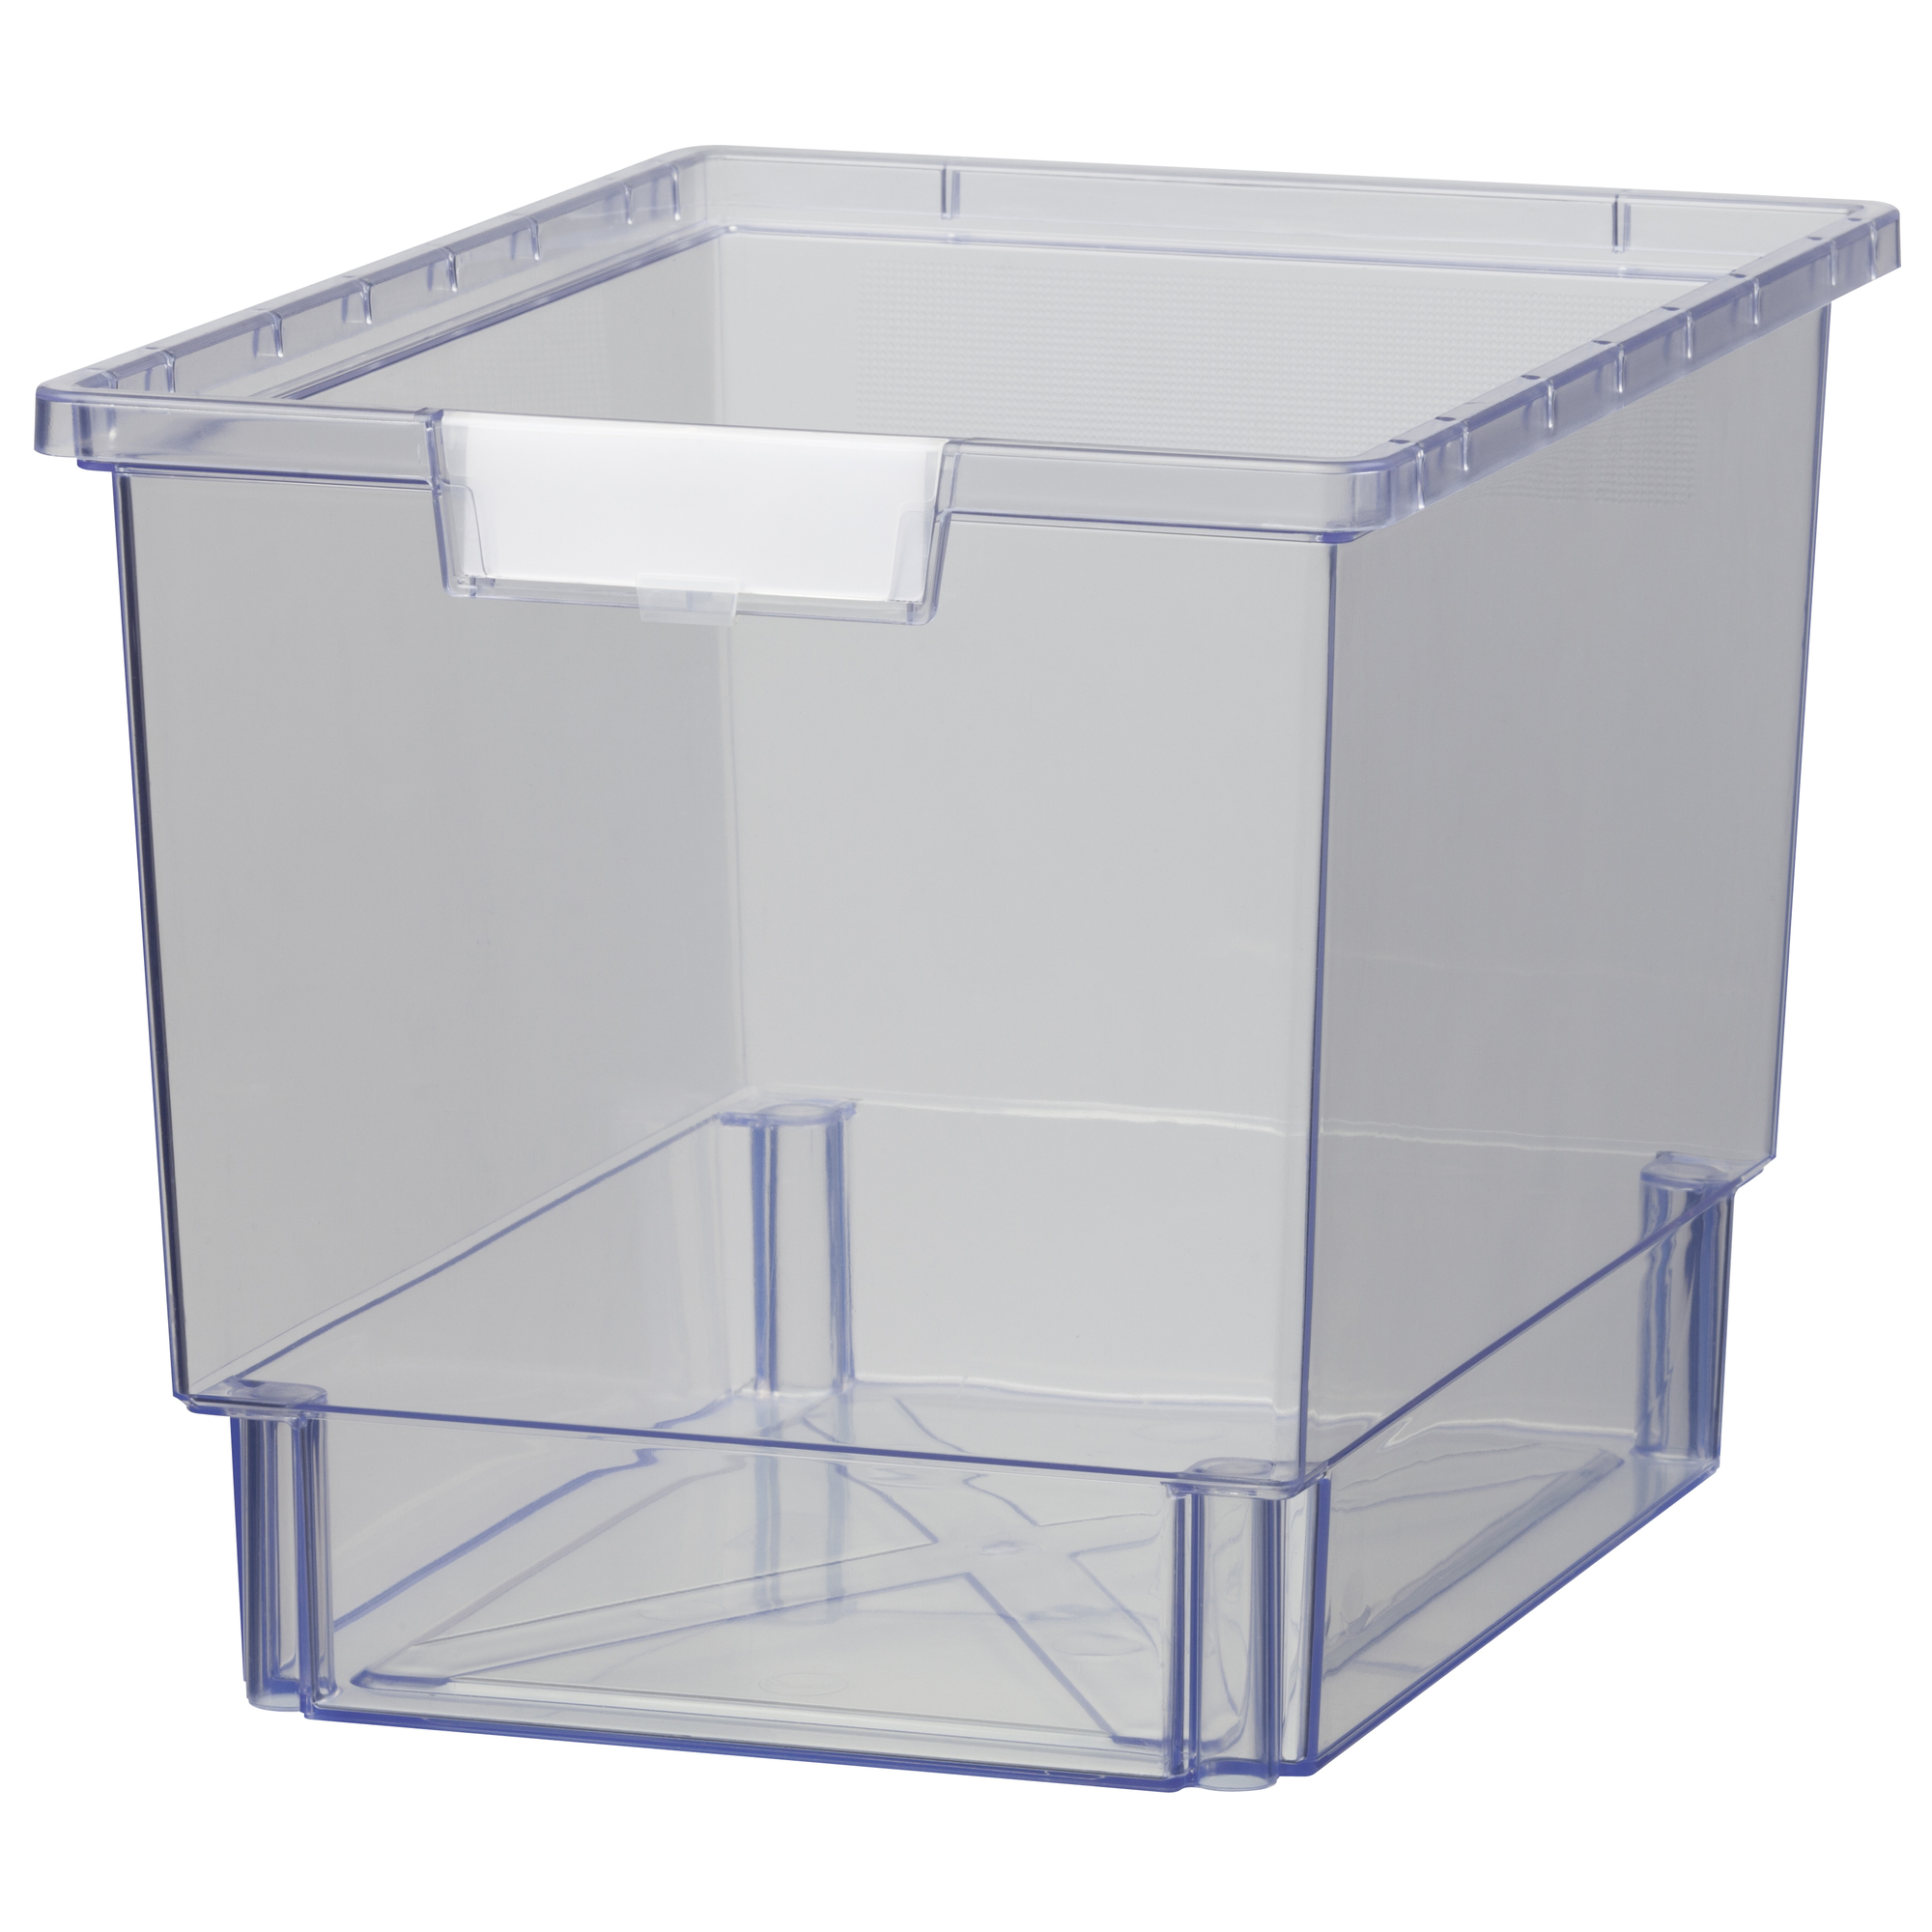 Certwood StorWerks, Slim Line 12Inch Tray in Clear - 1 Pack, Included (qty.) 1, Material Plastic, Height 9 in, Model CE1954CL1